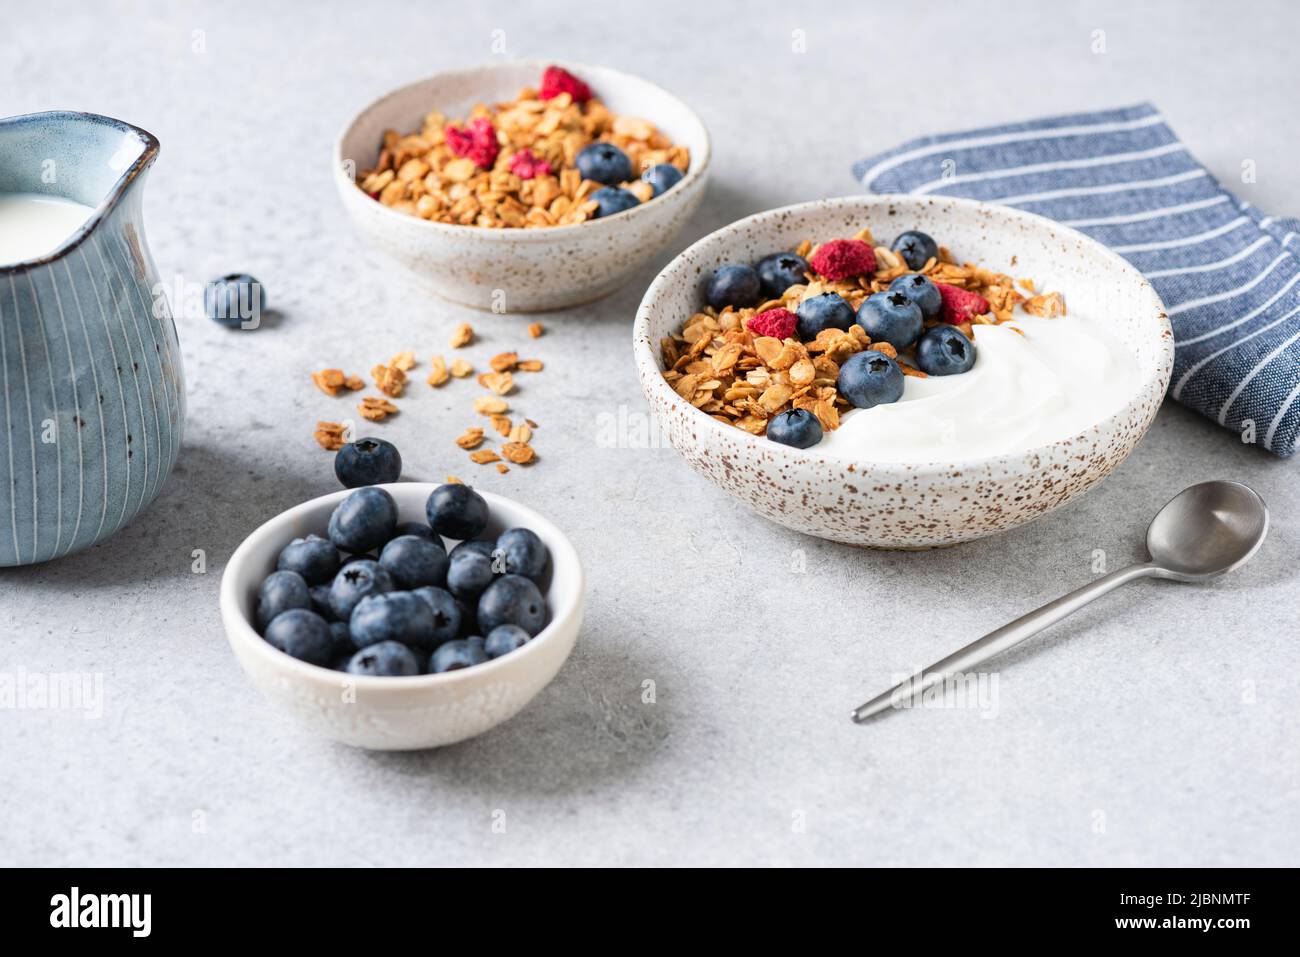 Granola yogurt bowl with blueberries and dried raspberries on grey concrete table background, closeup view Stock Photo